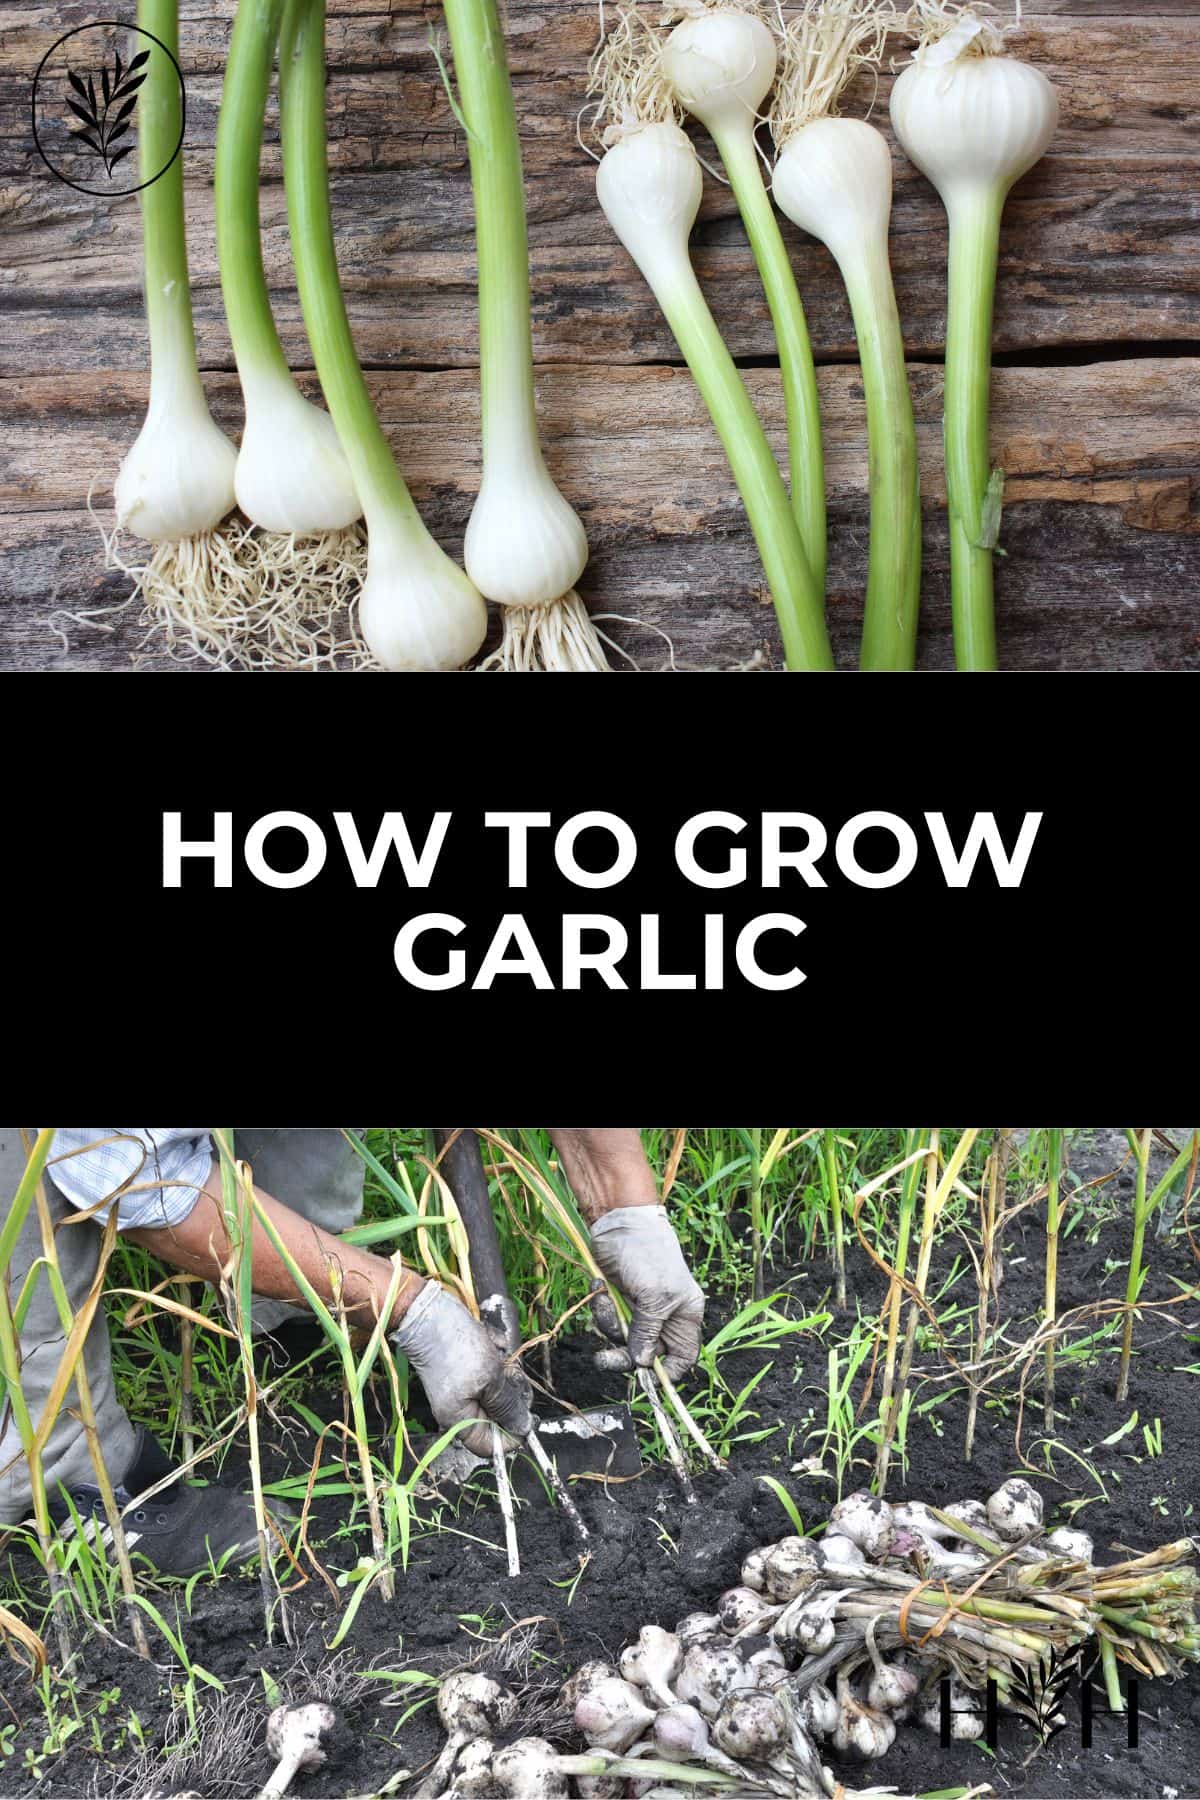 It's time to learn how to grow garlic! Fortunately, garlic is one of the most rewarding crops to grow in the garden. It takes very little effort to grow but is frequently used in the kitchen. You'll spend more time enjoying it in your cooking than tending to it in the garden. Here are the basic steps for how to grow garlic: via @home4theharvest